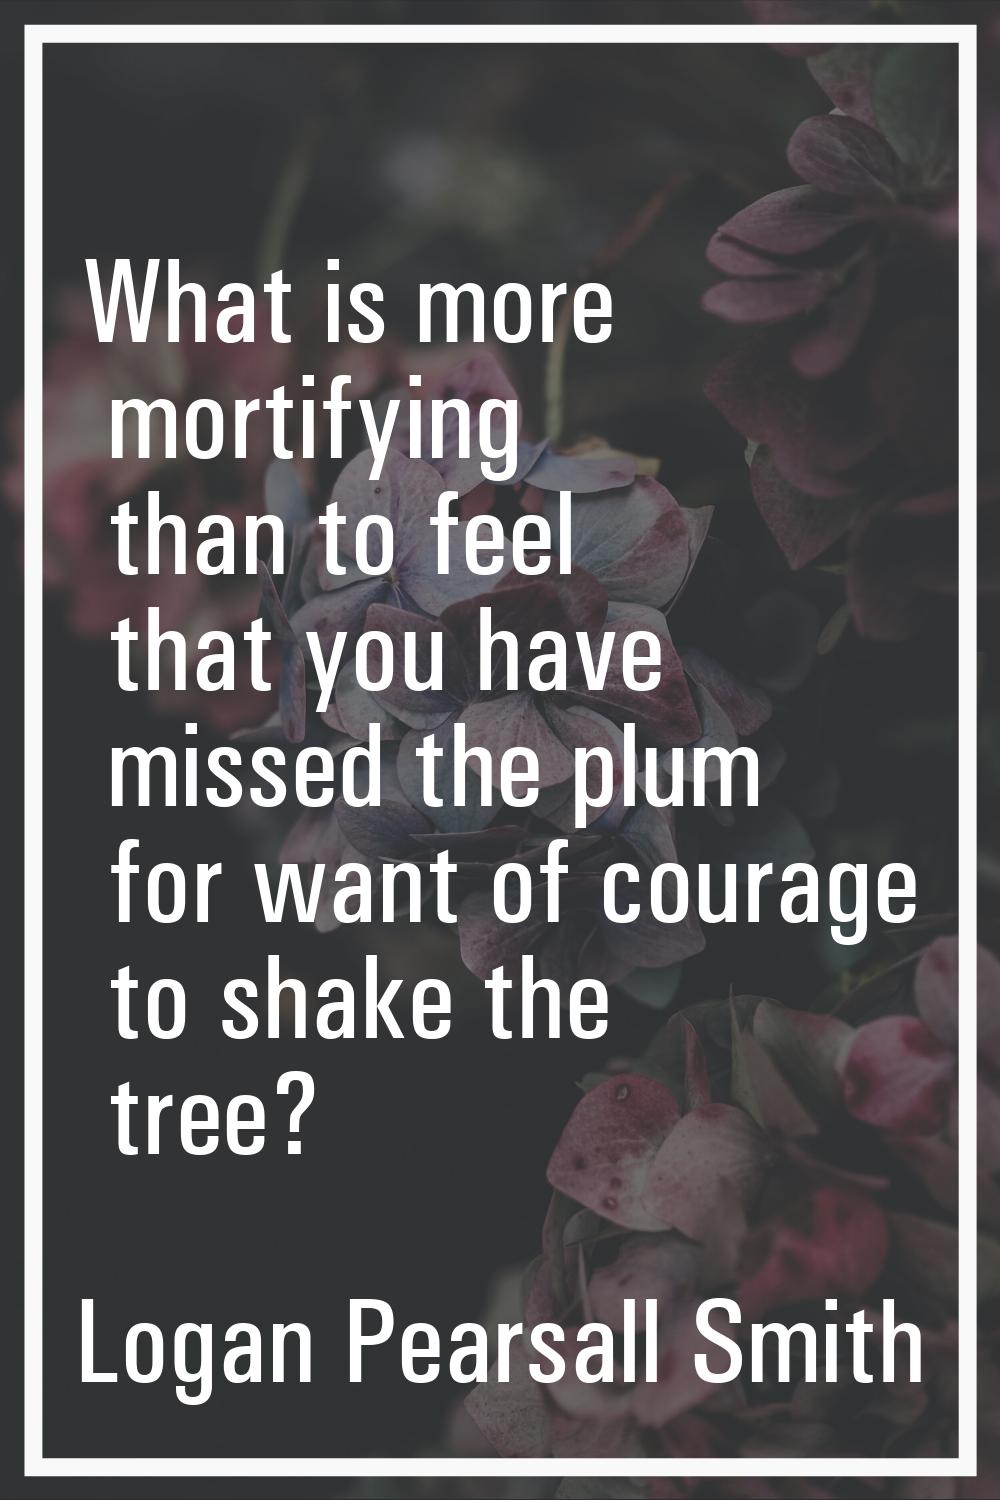 What is more mortifying than to feel that you have missed the plum for want of courage to shake the